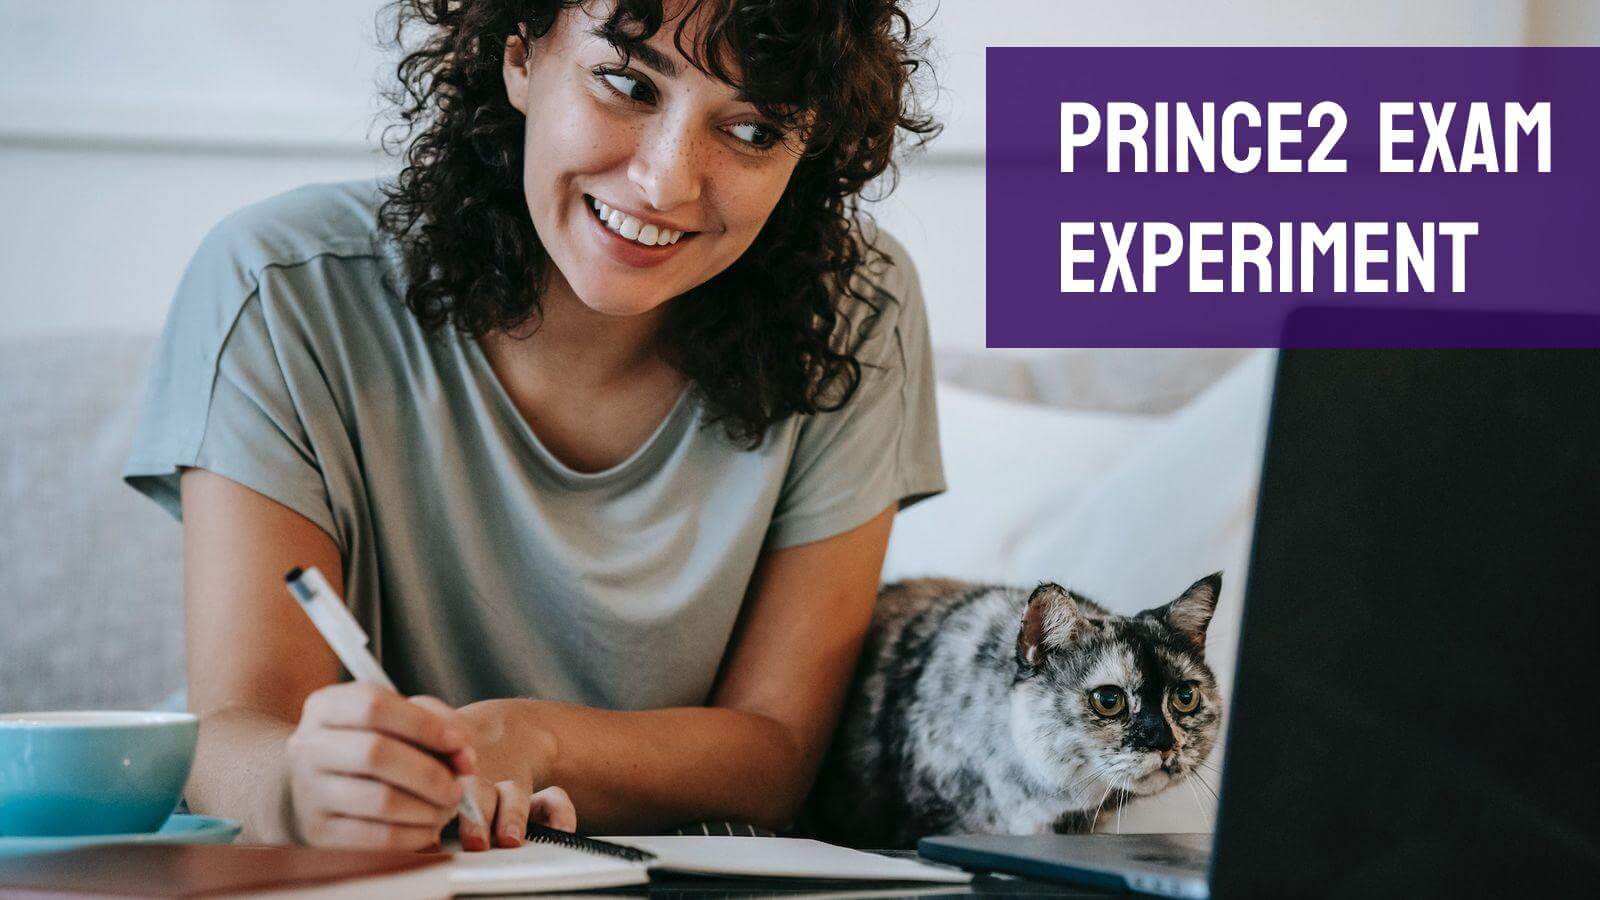 An experiment taking PRINCE2 and PRINCE2 Agile exams